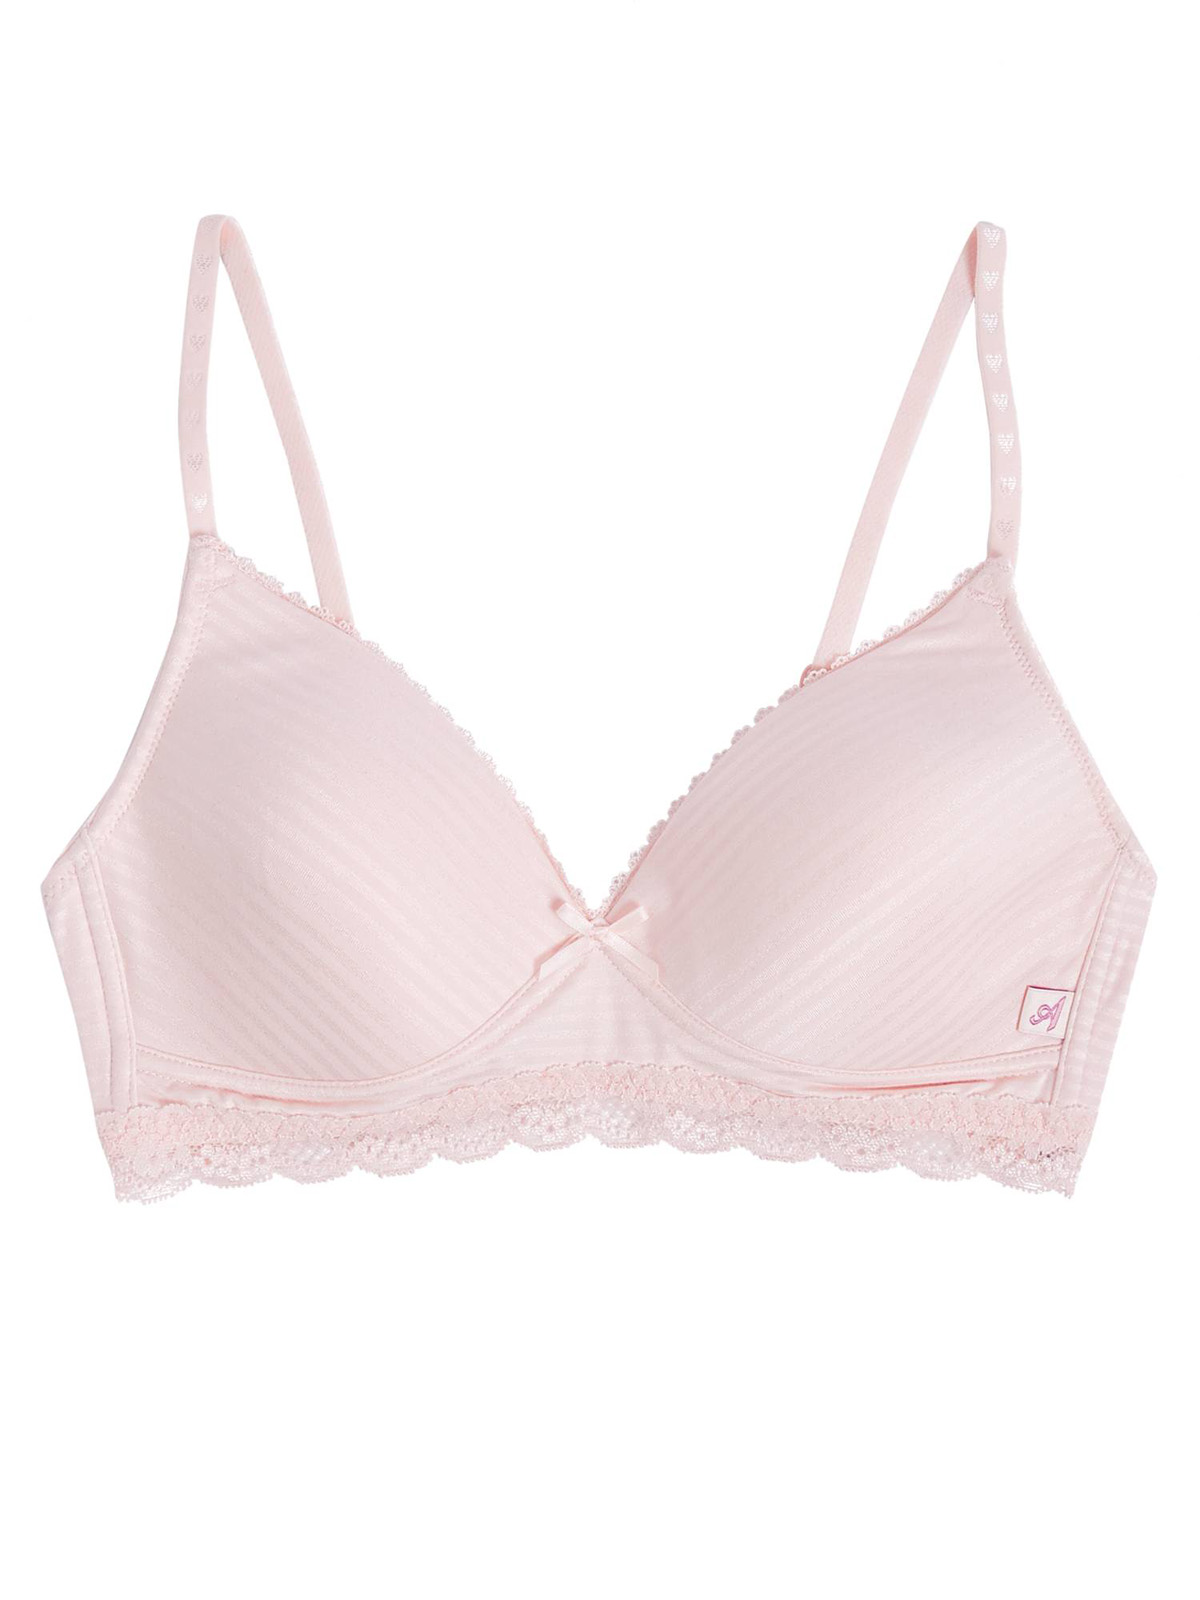 Marks and Spencer - - M&5 ASSORTED Full Cup Bras - Size 30 to 38 (AA-A-C-D)